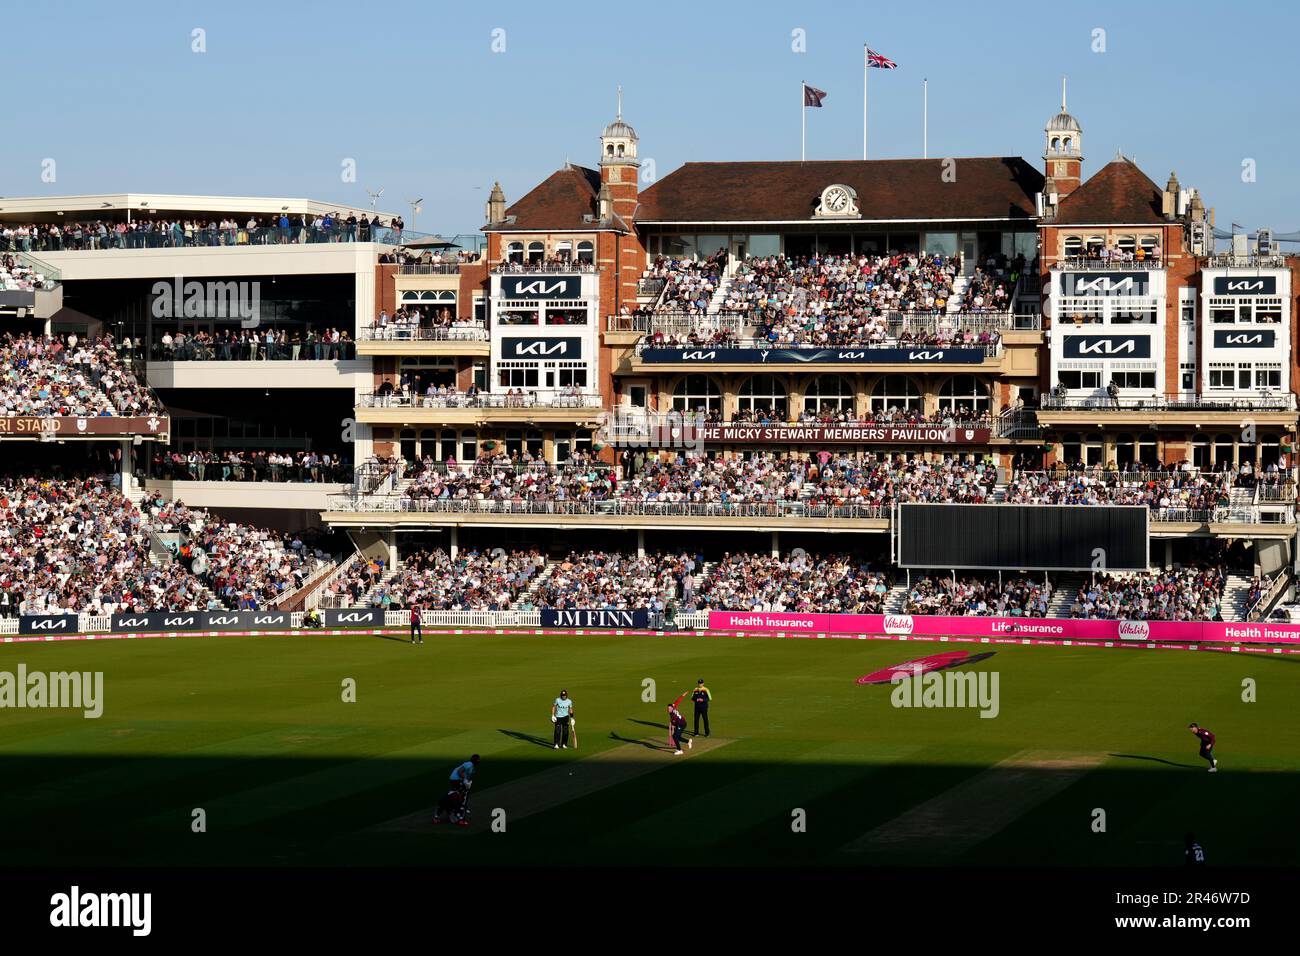 Kent Spitfire’s George Linde bowling to Surrey’s Jamie Smith during the Vitality Blast T20 match at the Kia Oval, London Picture date: Friday May 26, 2022. Stock Photo